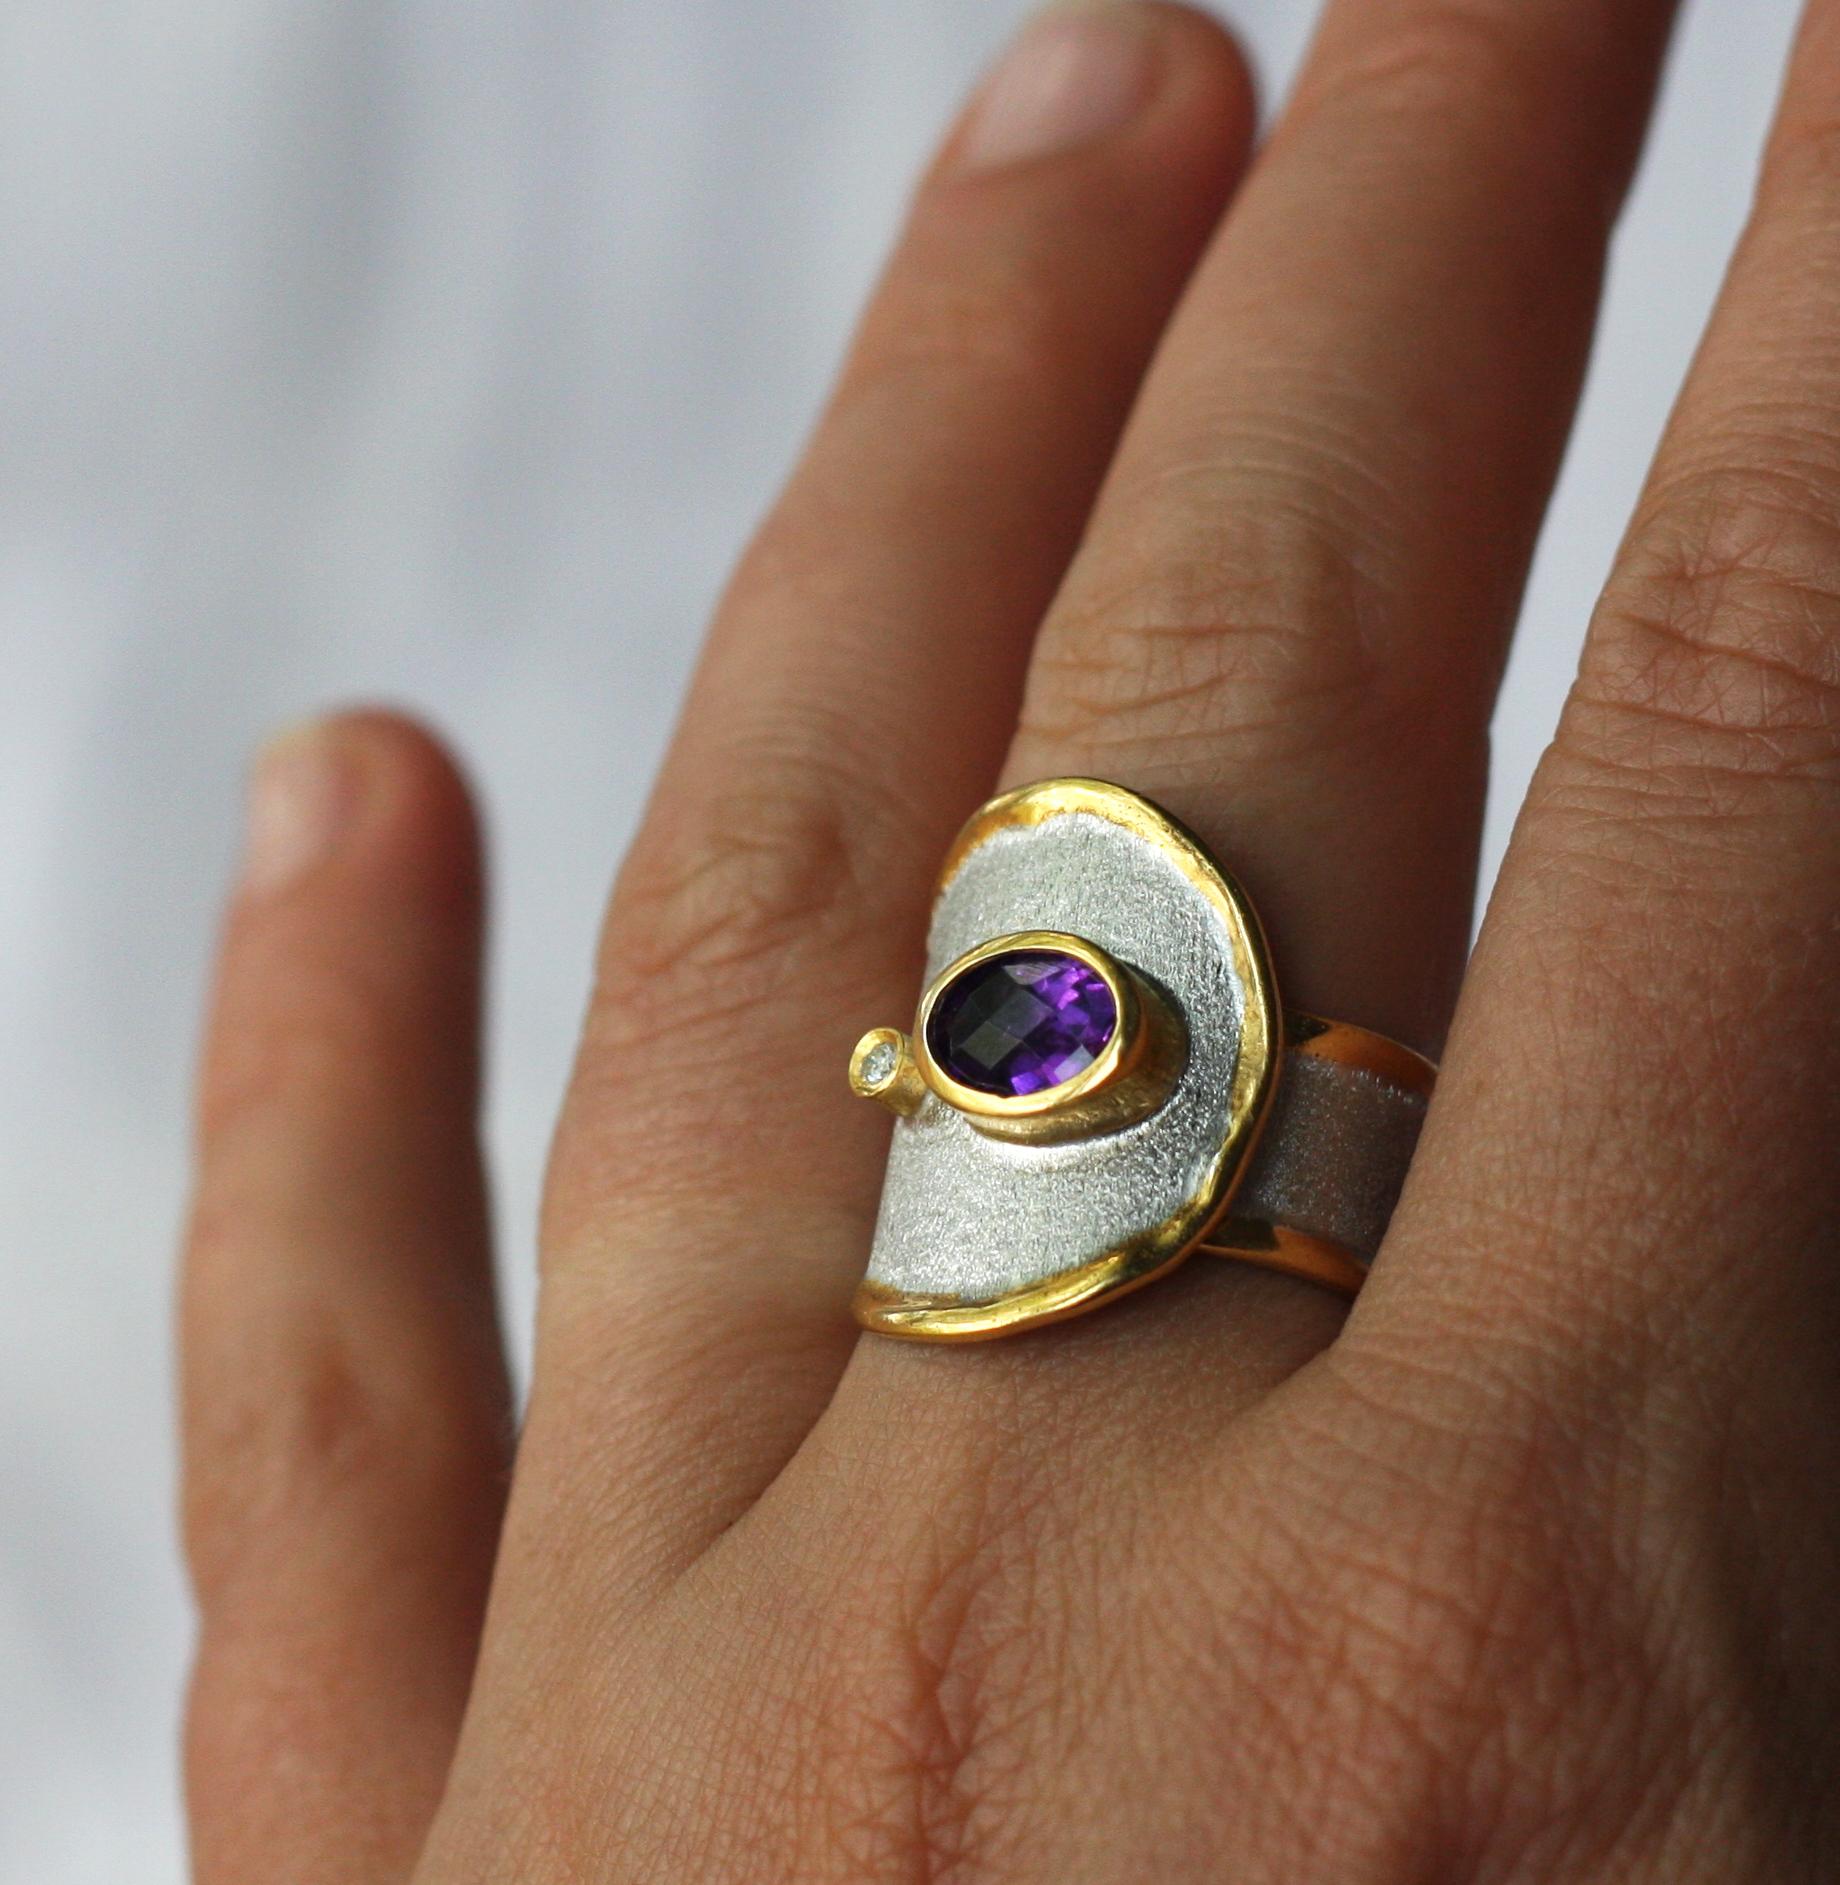 Contemporary Yianni Creations 1.25 Amethyst and Diamond Ring in Fine Silver and 24 Karat Gold